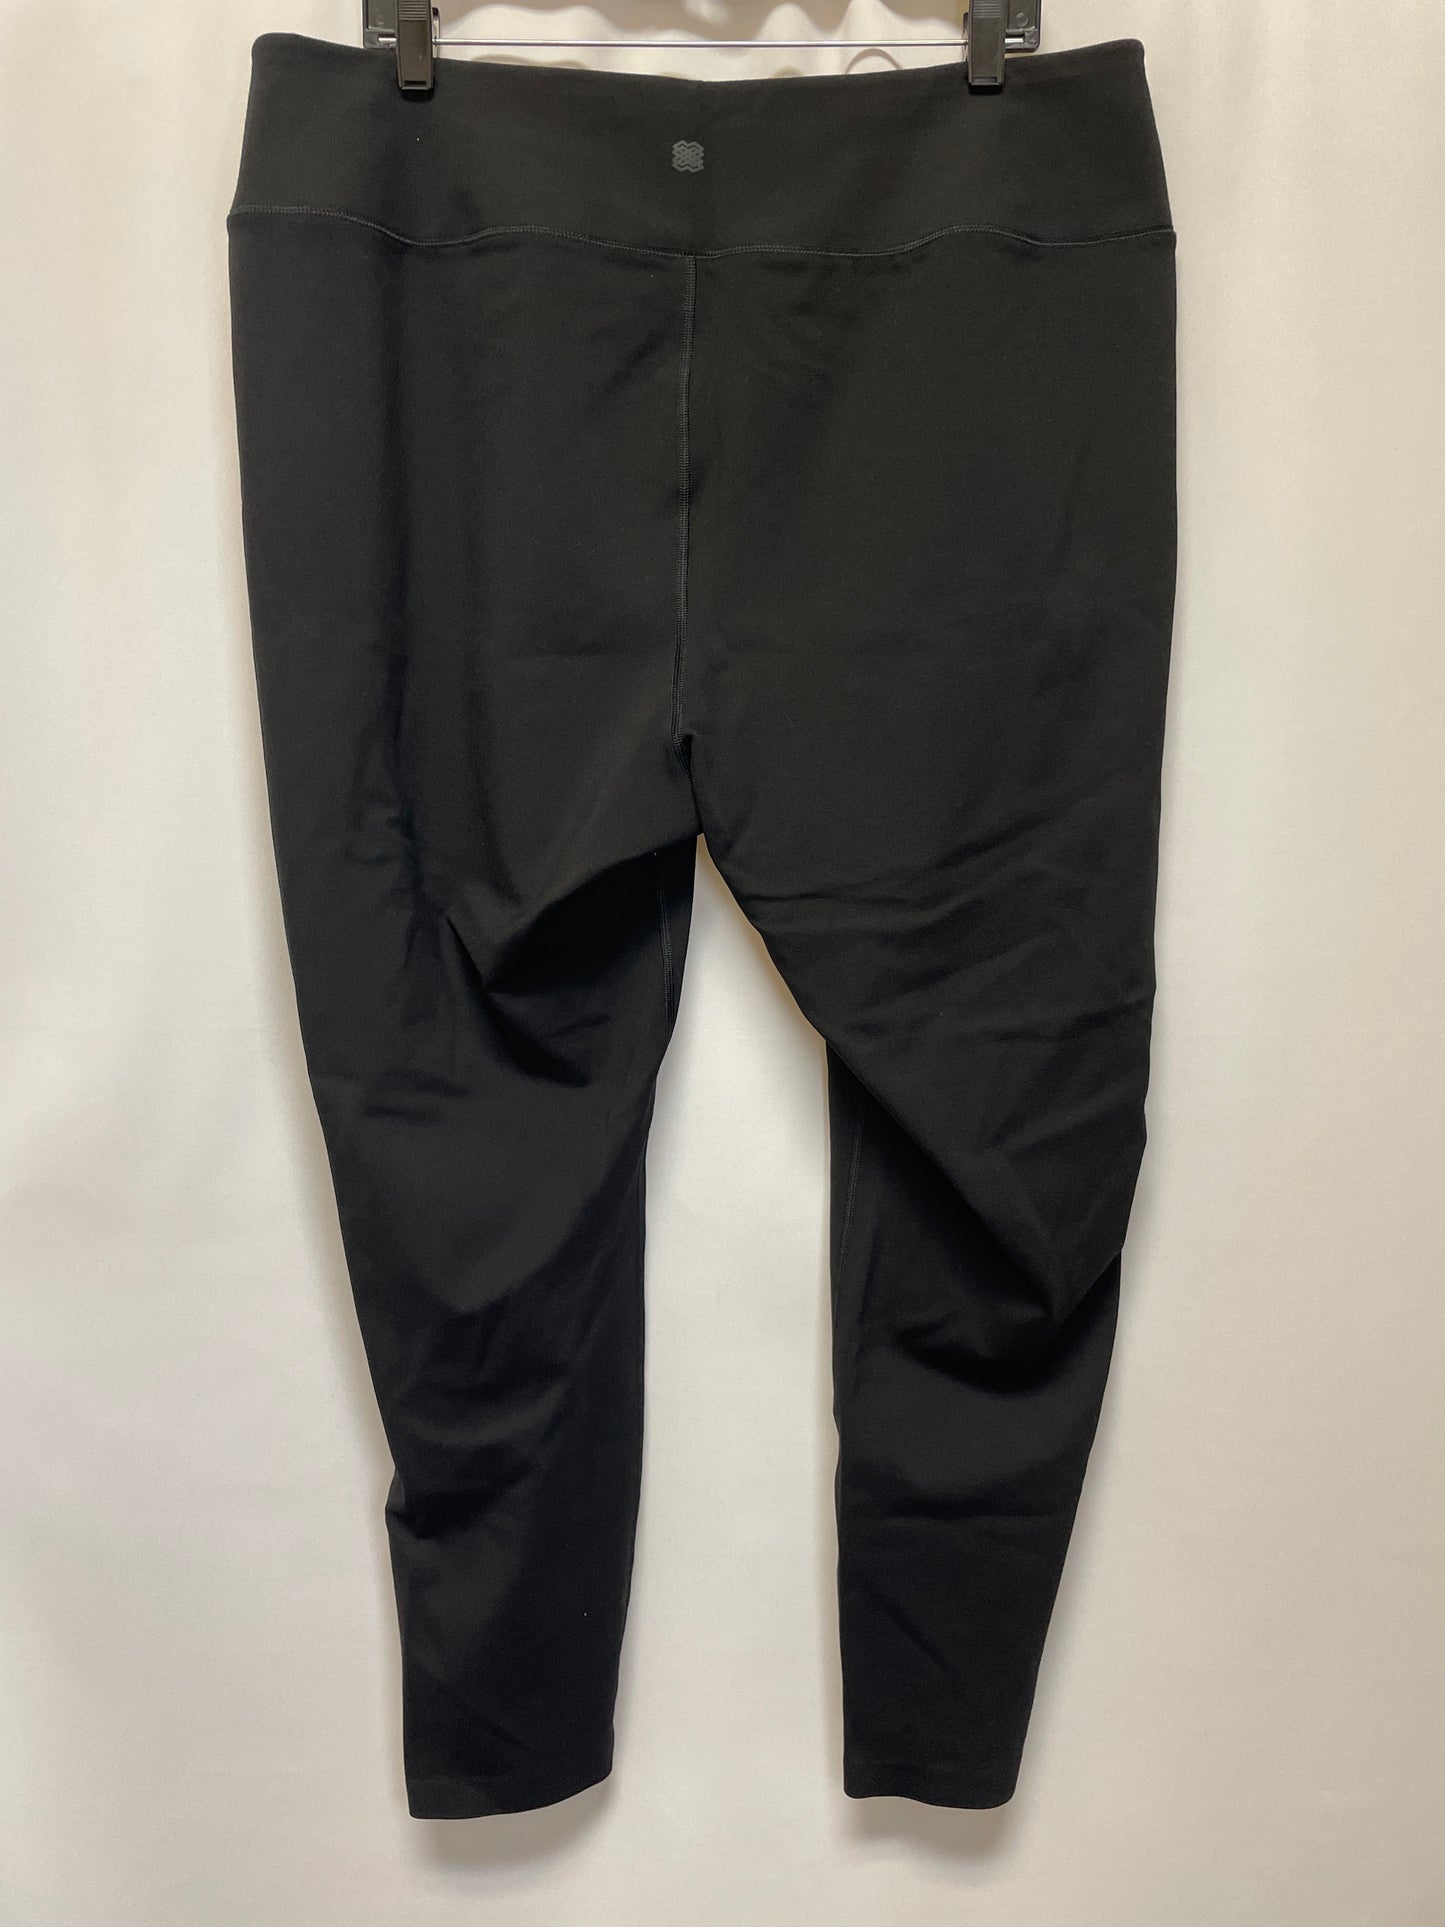 Athletic Leggings By Clothes Mentor  Size: 2x